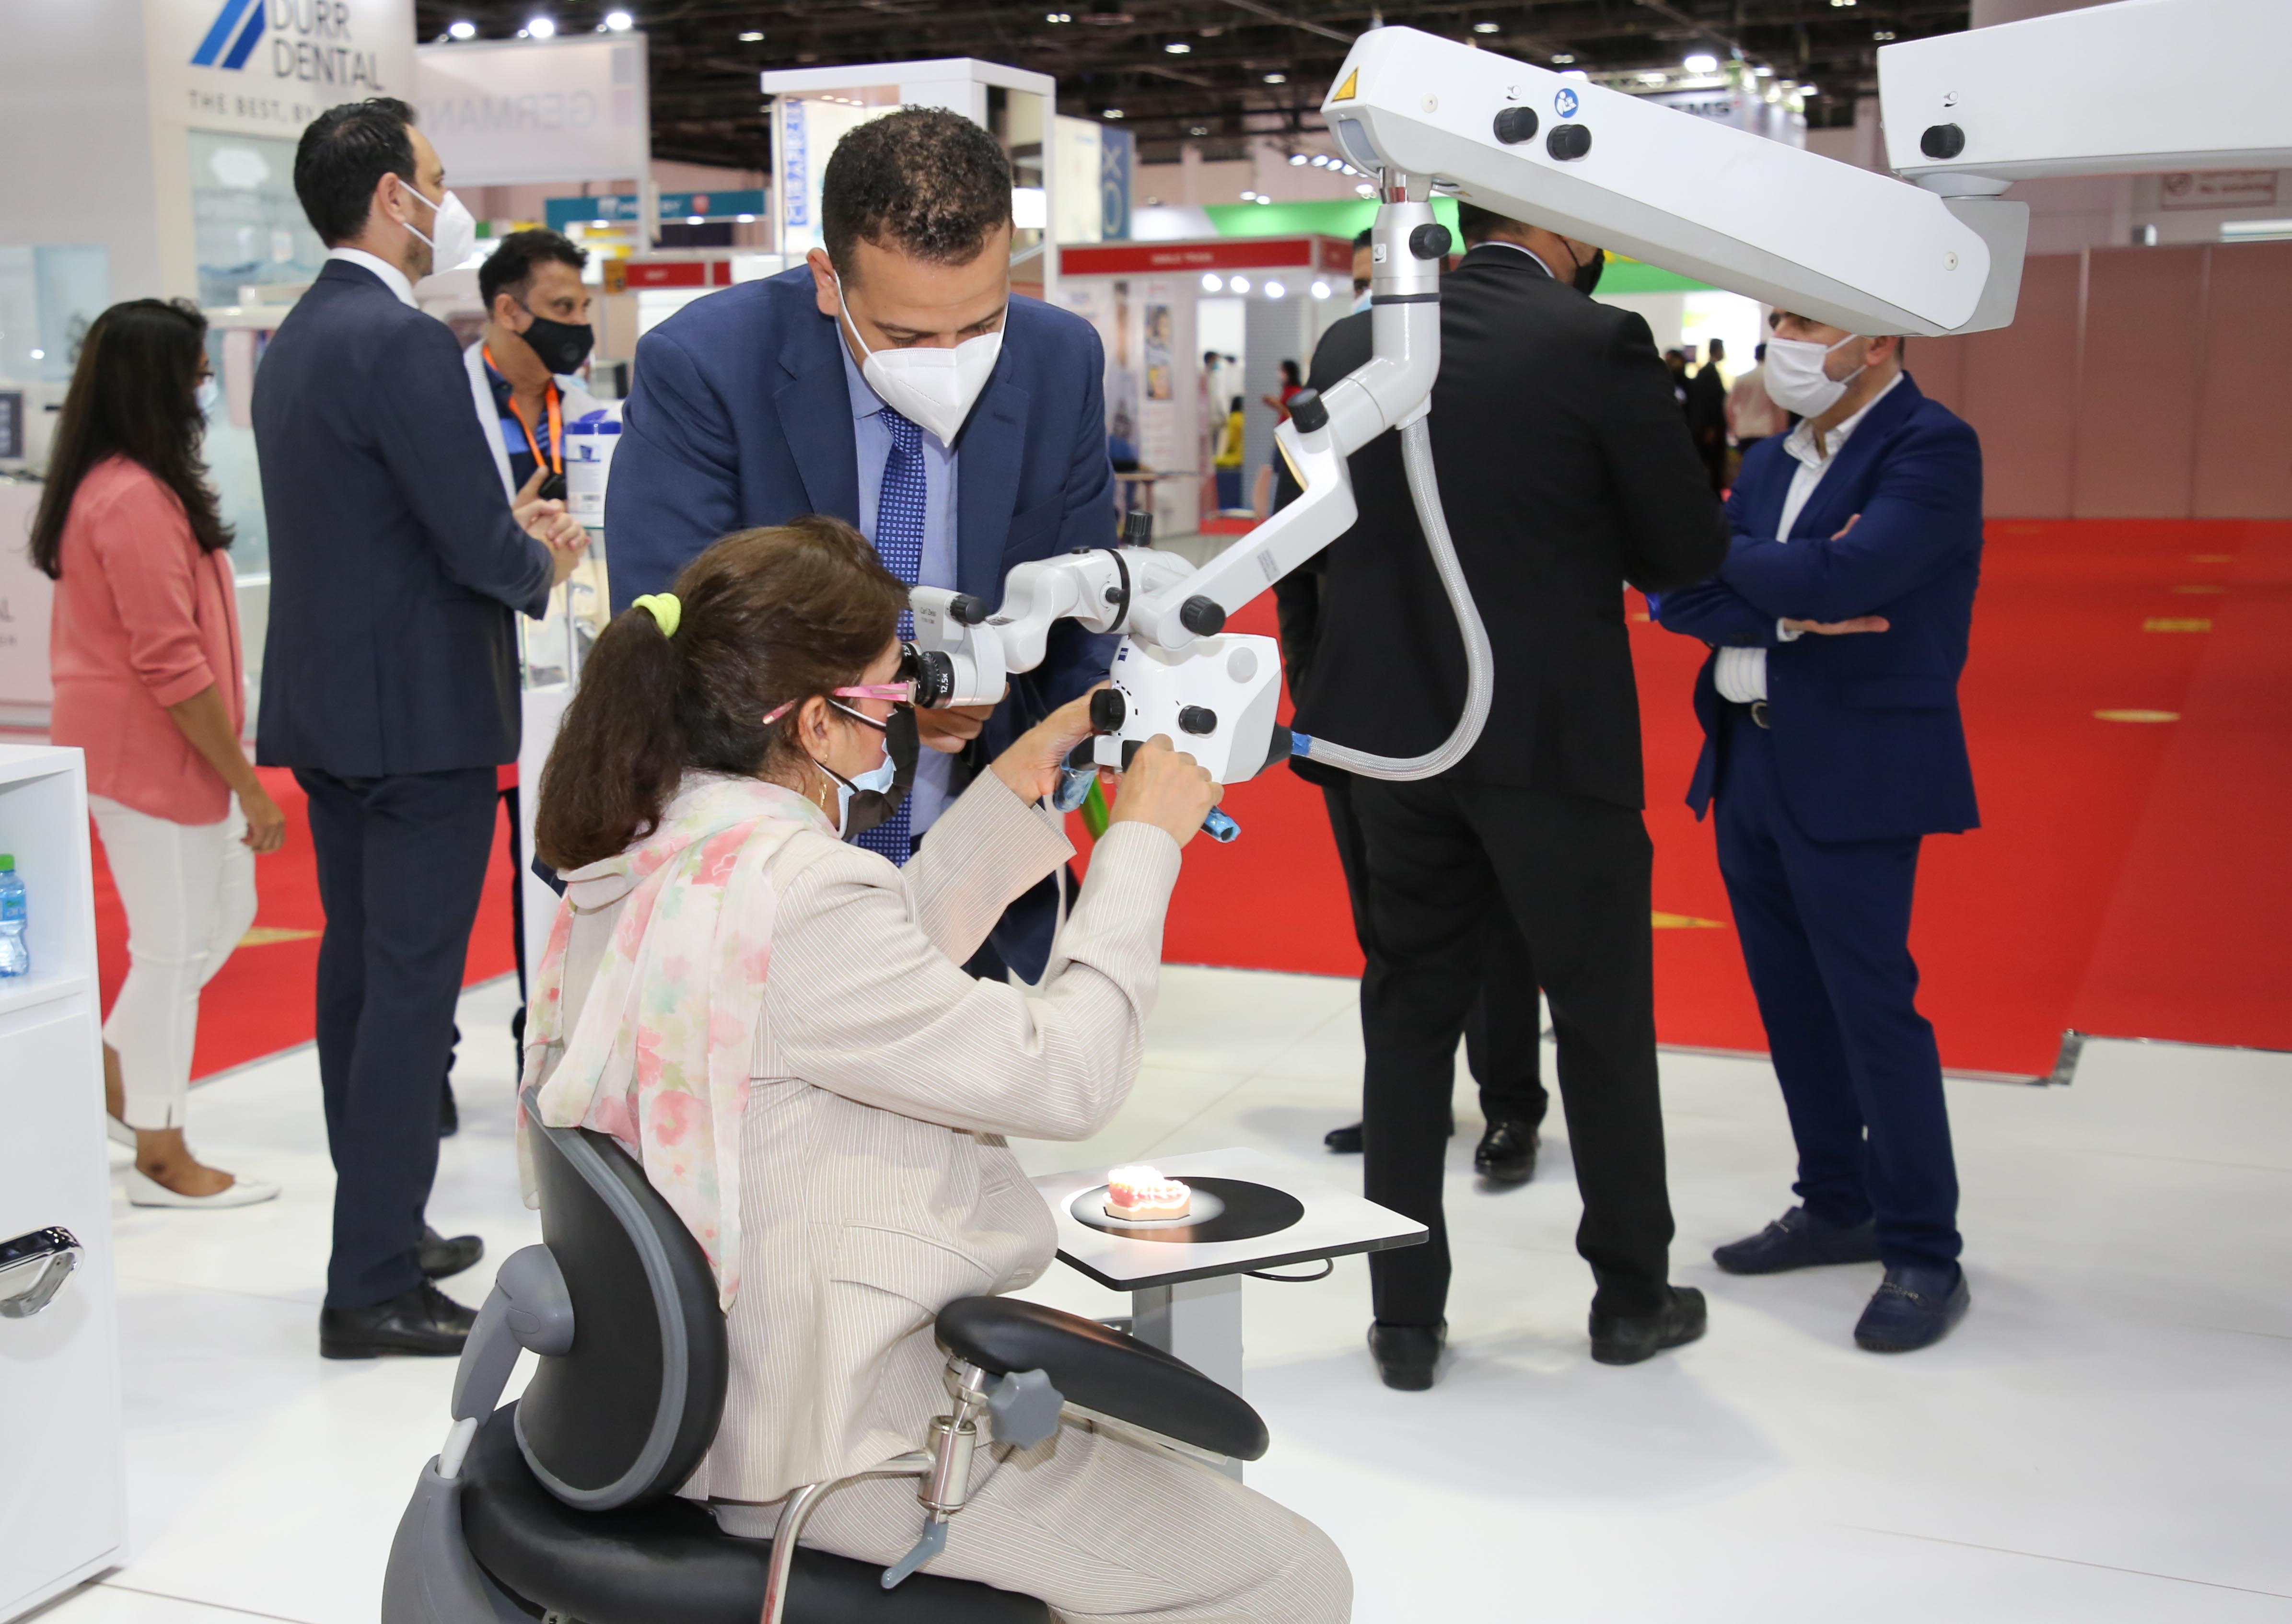 AEEDC Dubai, World’s Largest Scientific Dental Conference And